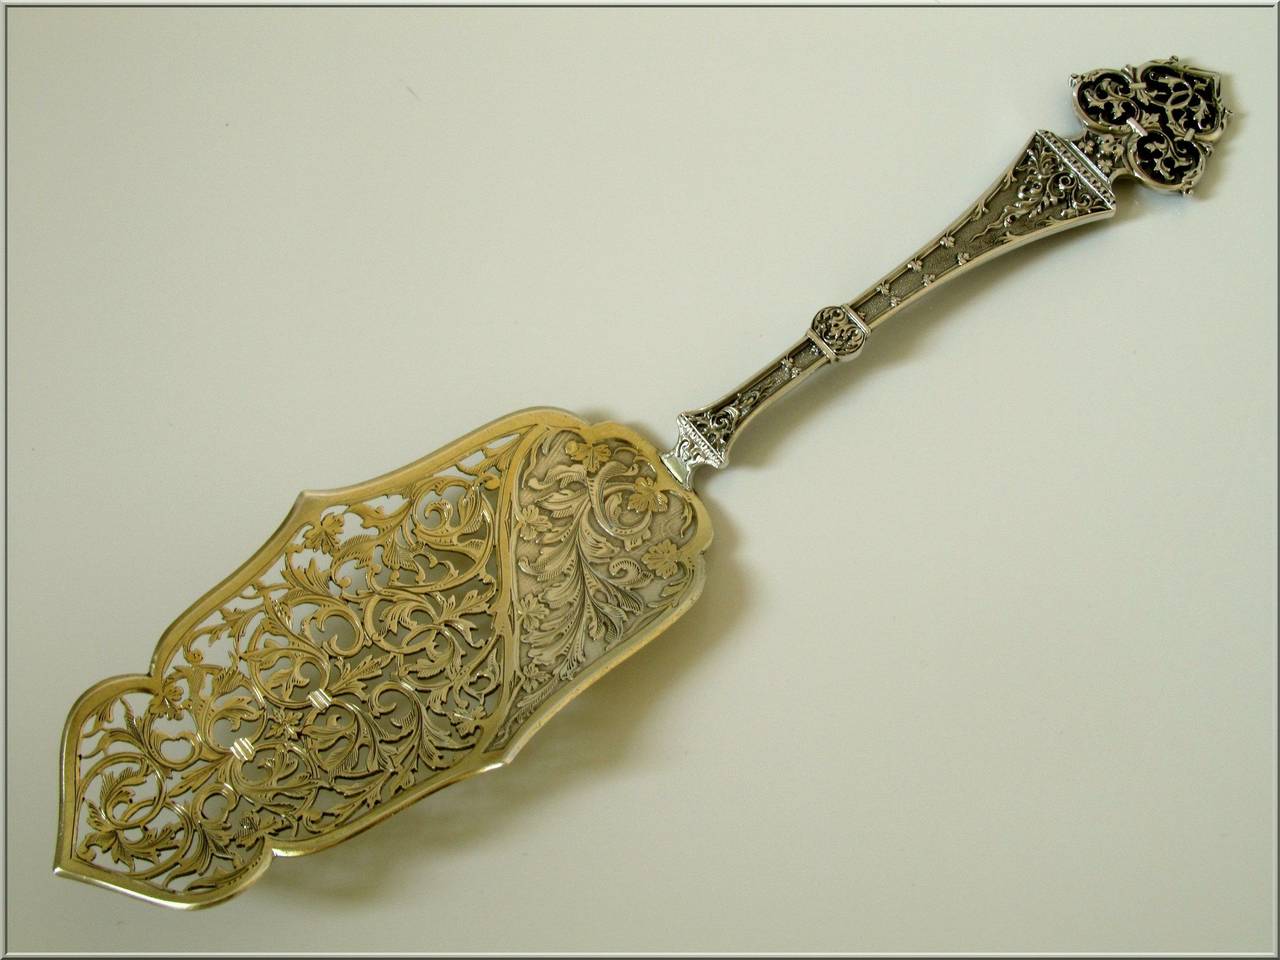 Puiforcat Masterpiece French All Sterling Silver Pie/Pastry Server Trilobé 4